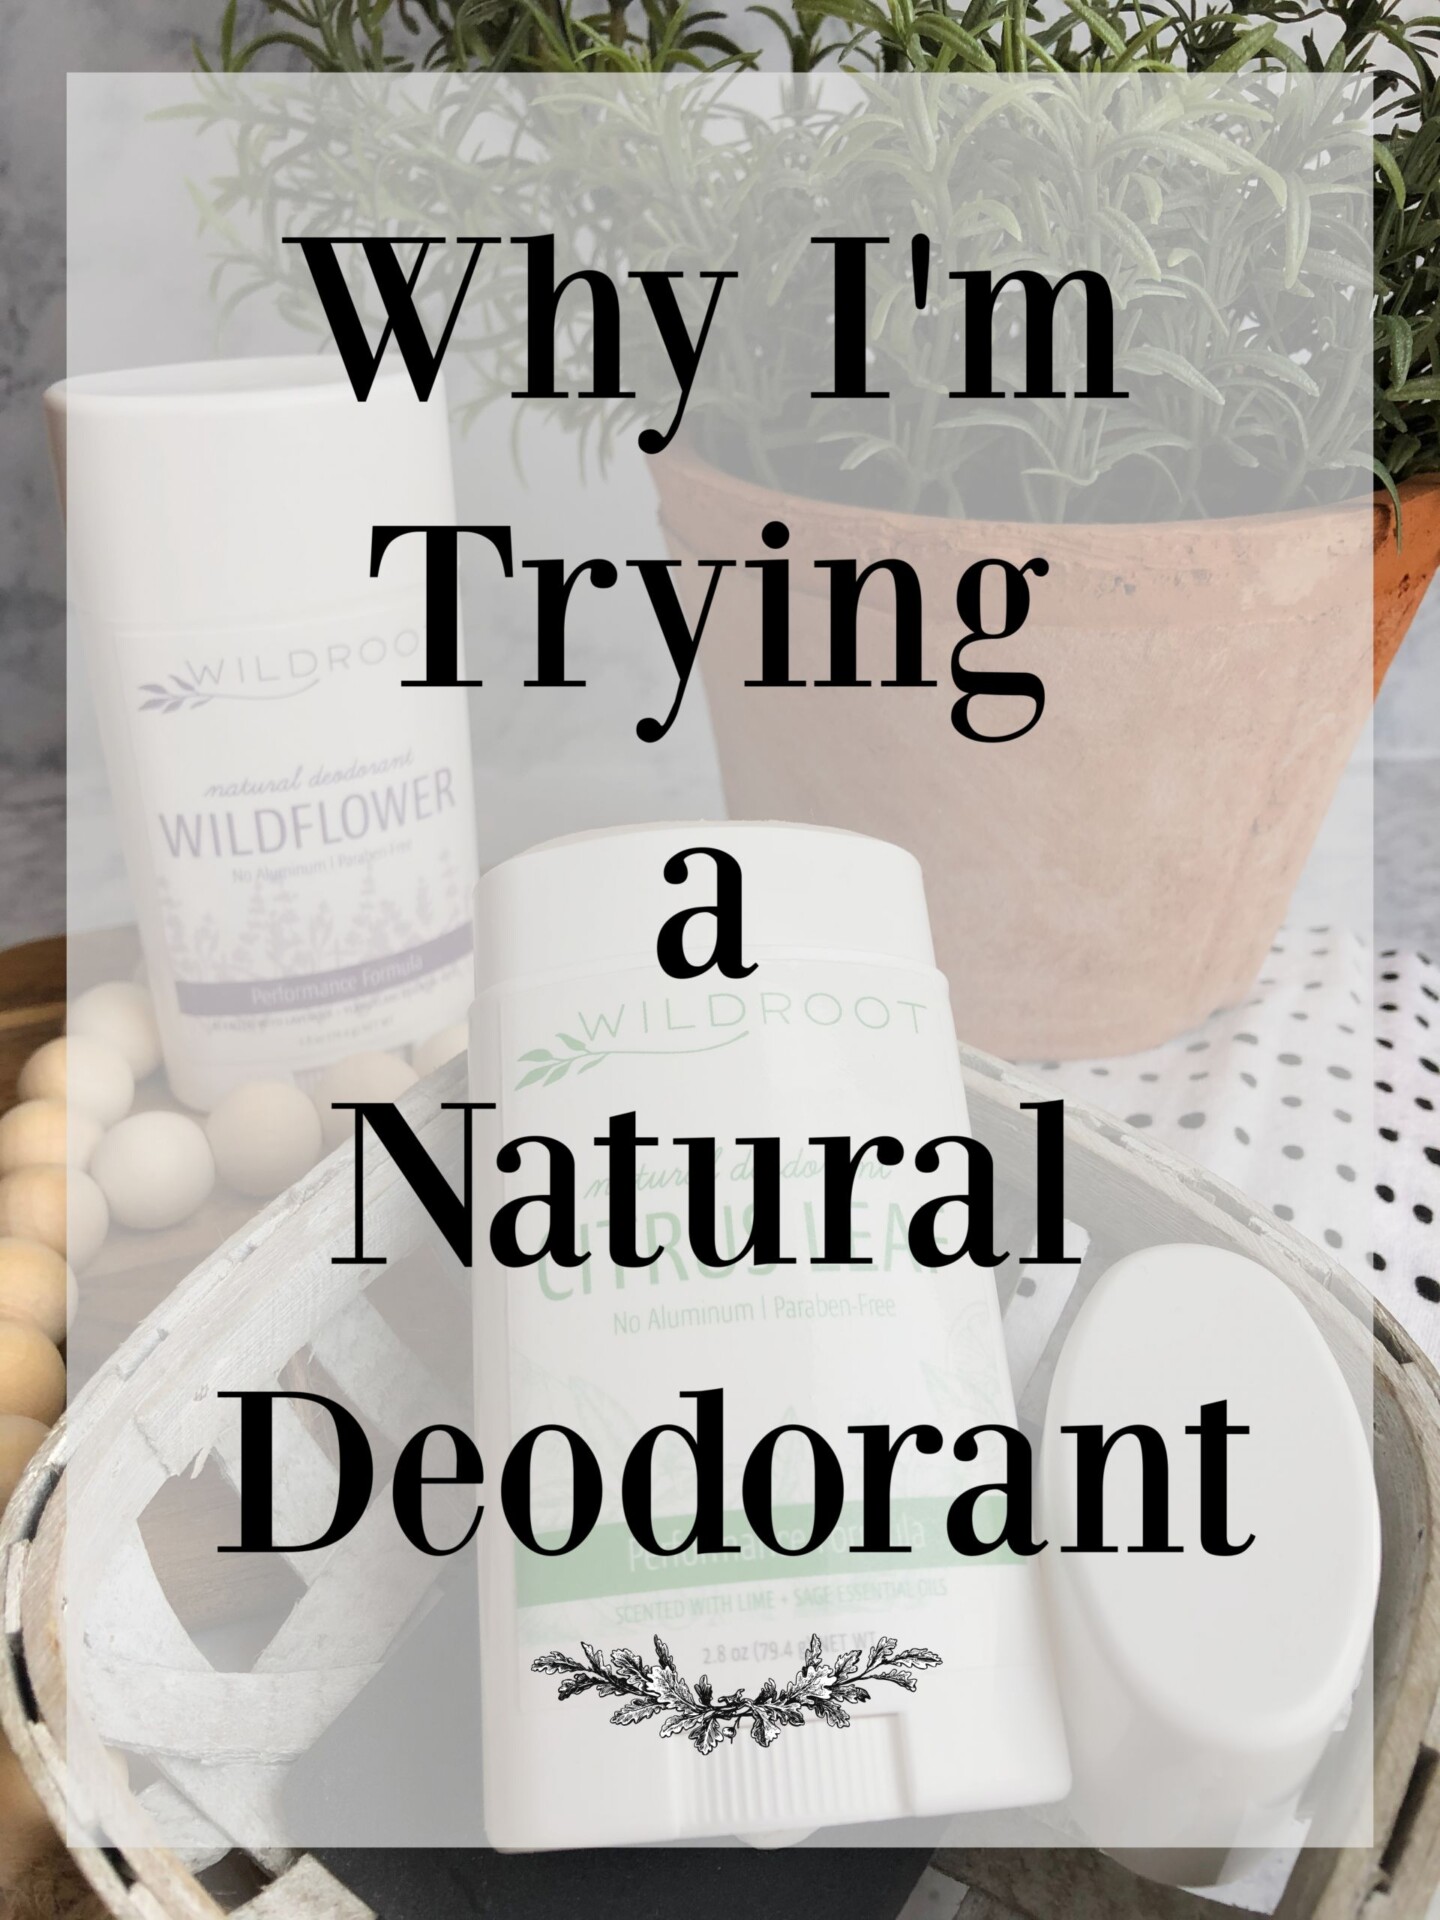 Why I’m Trying a Natural Deodorant